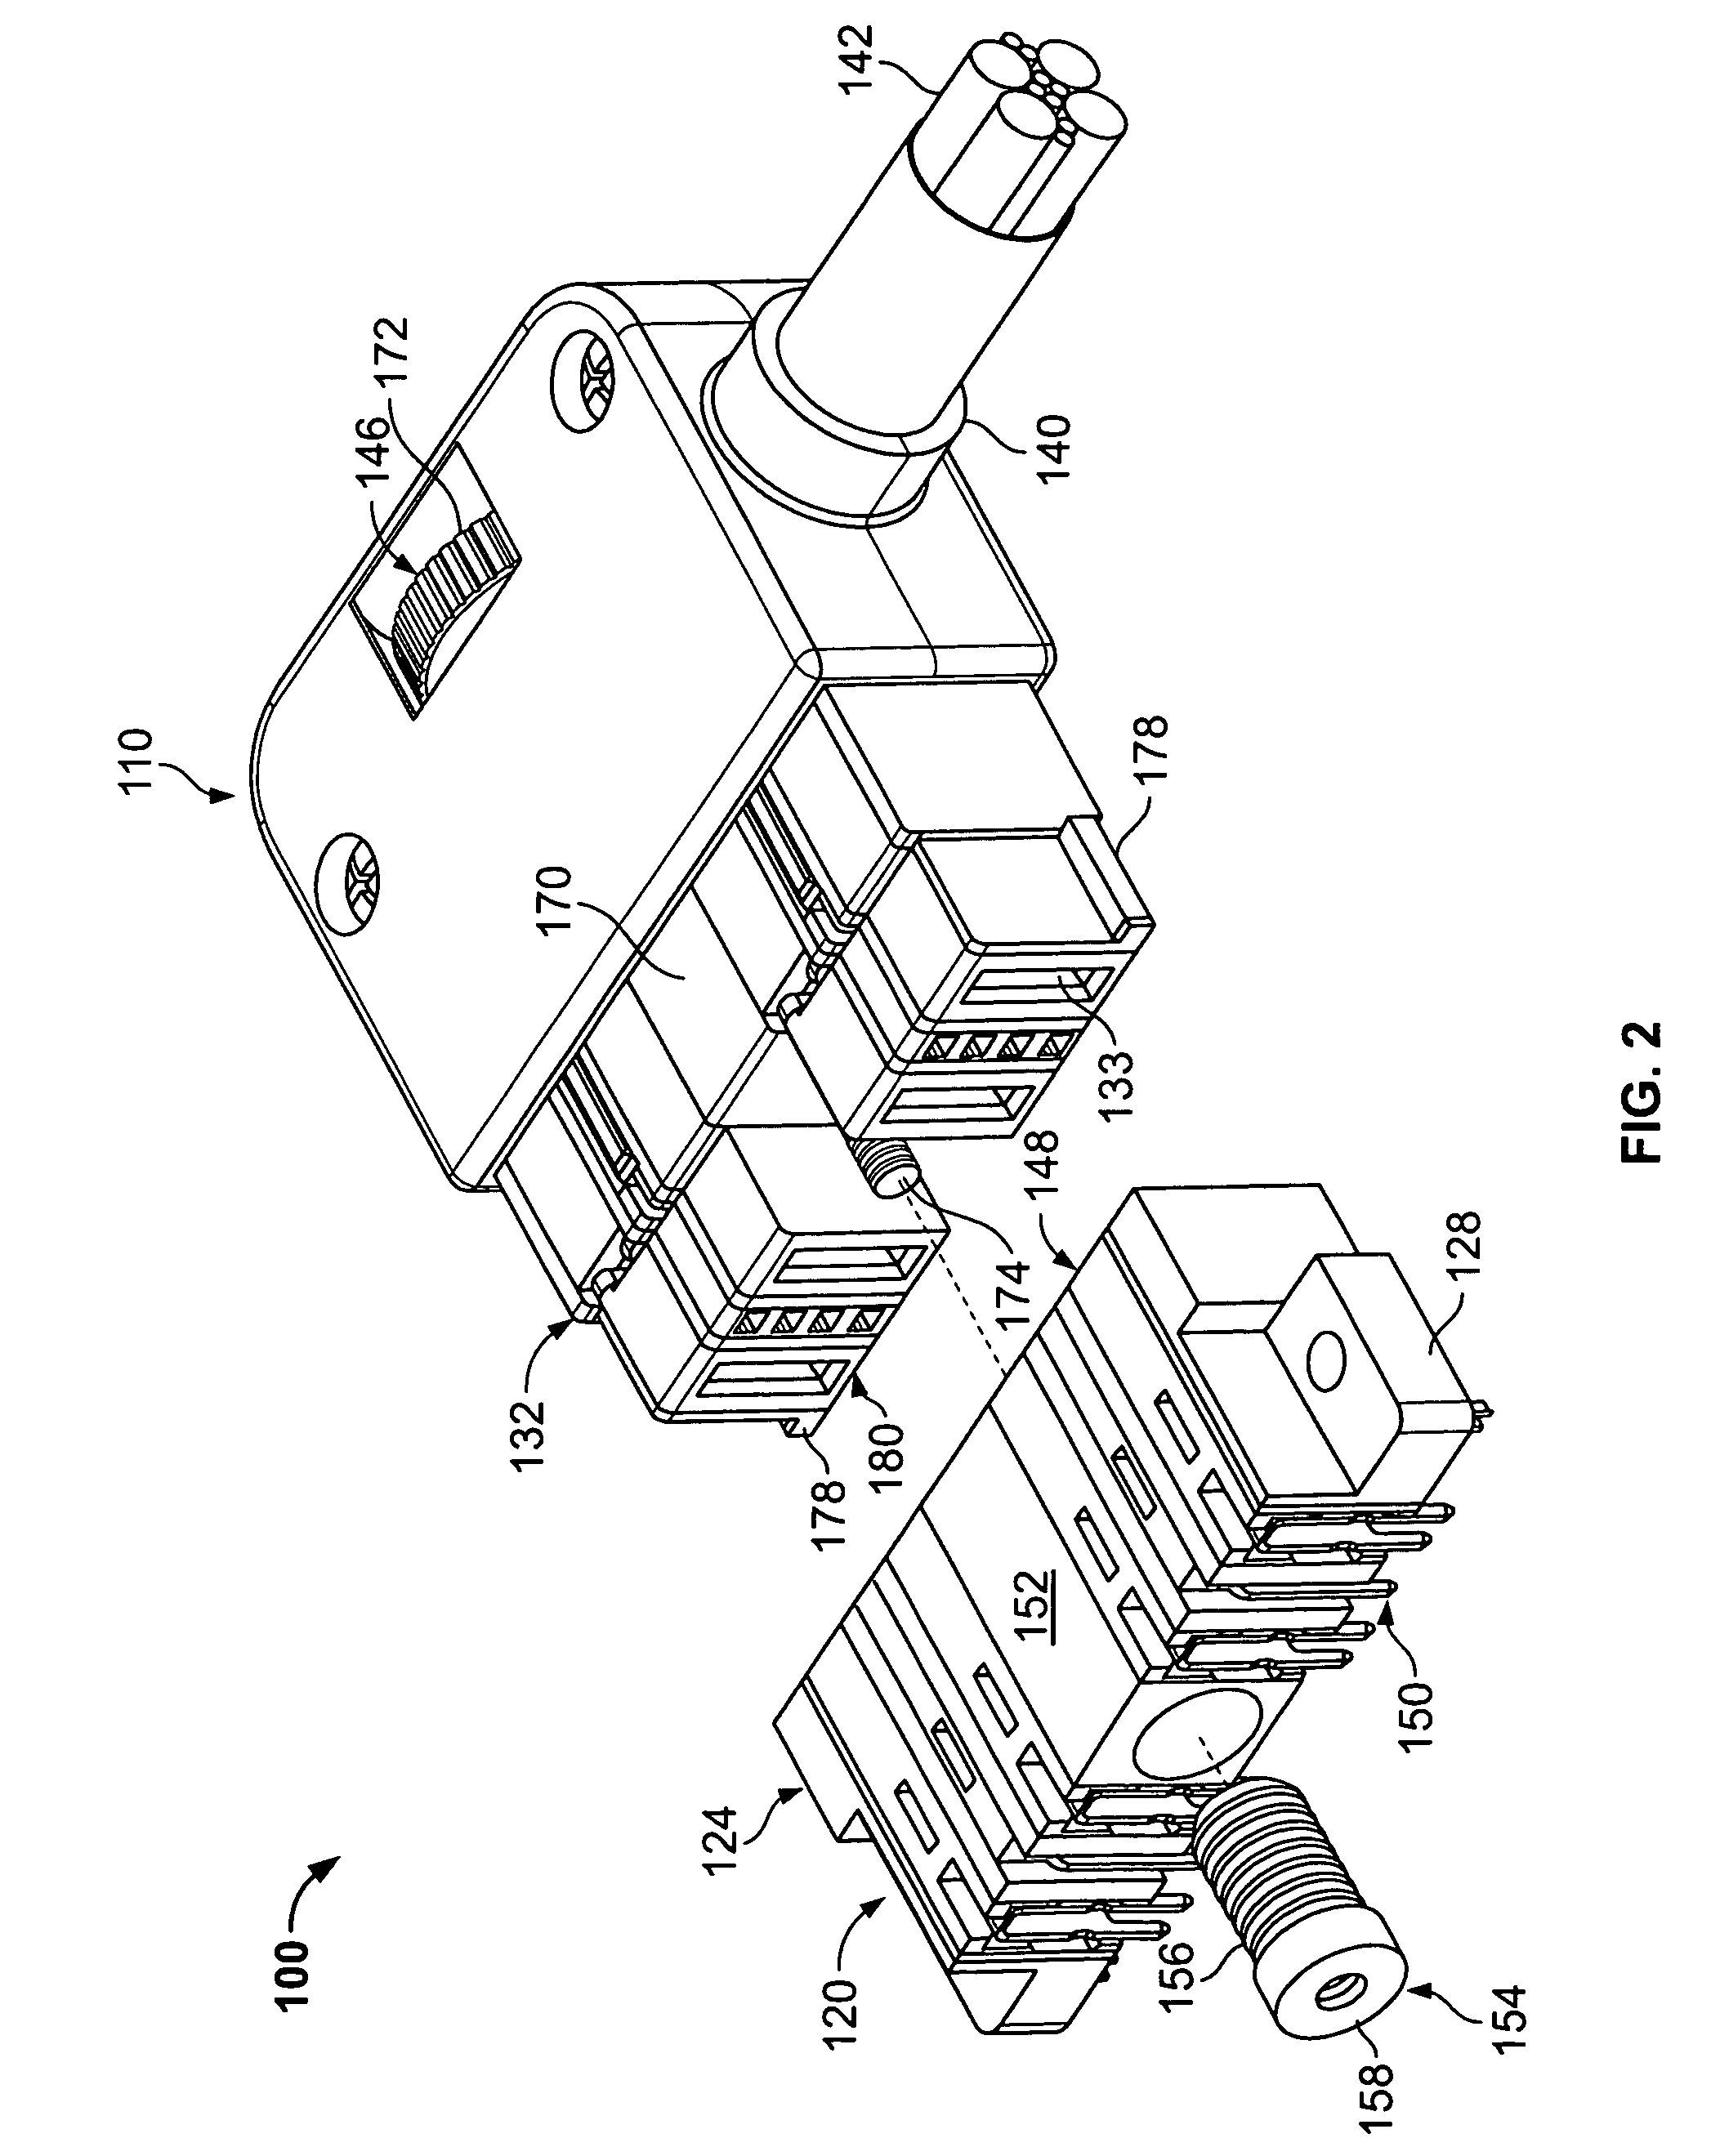 Connector with thumb screw retention member